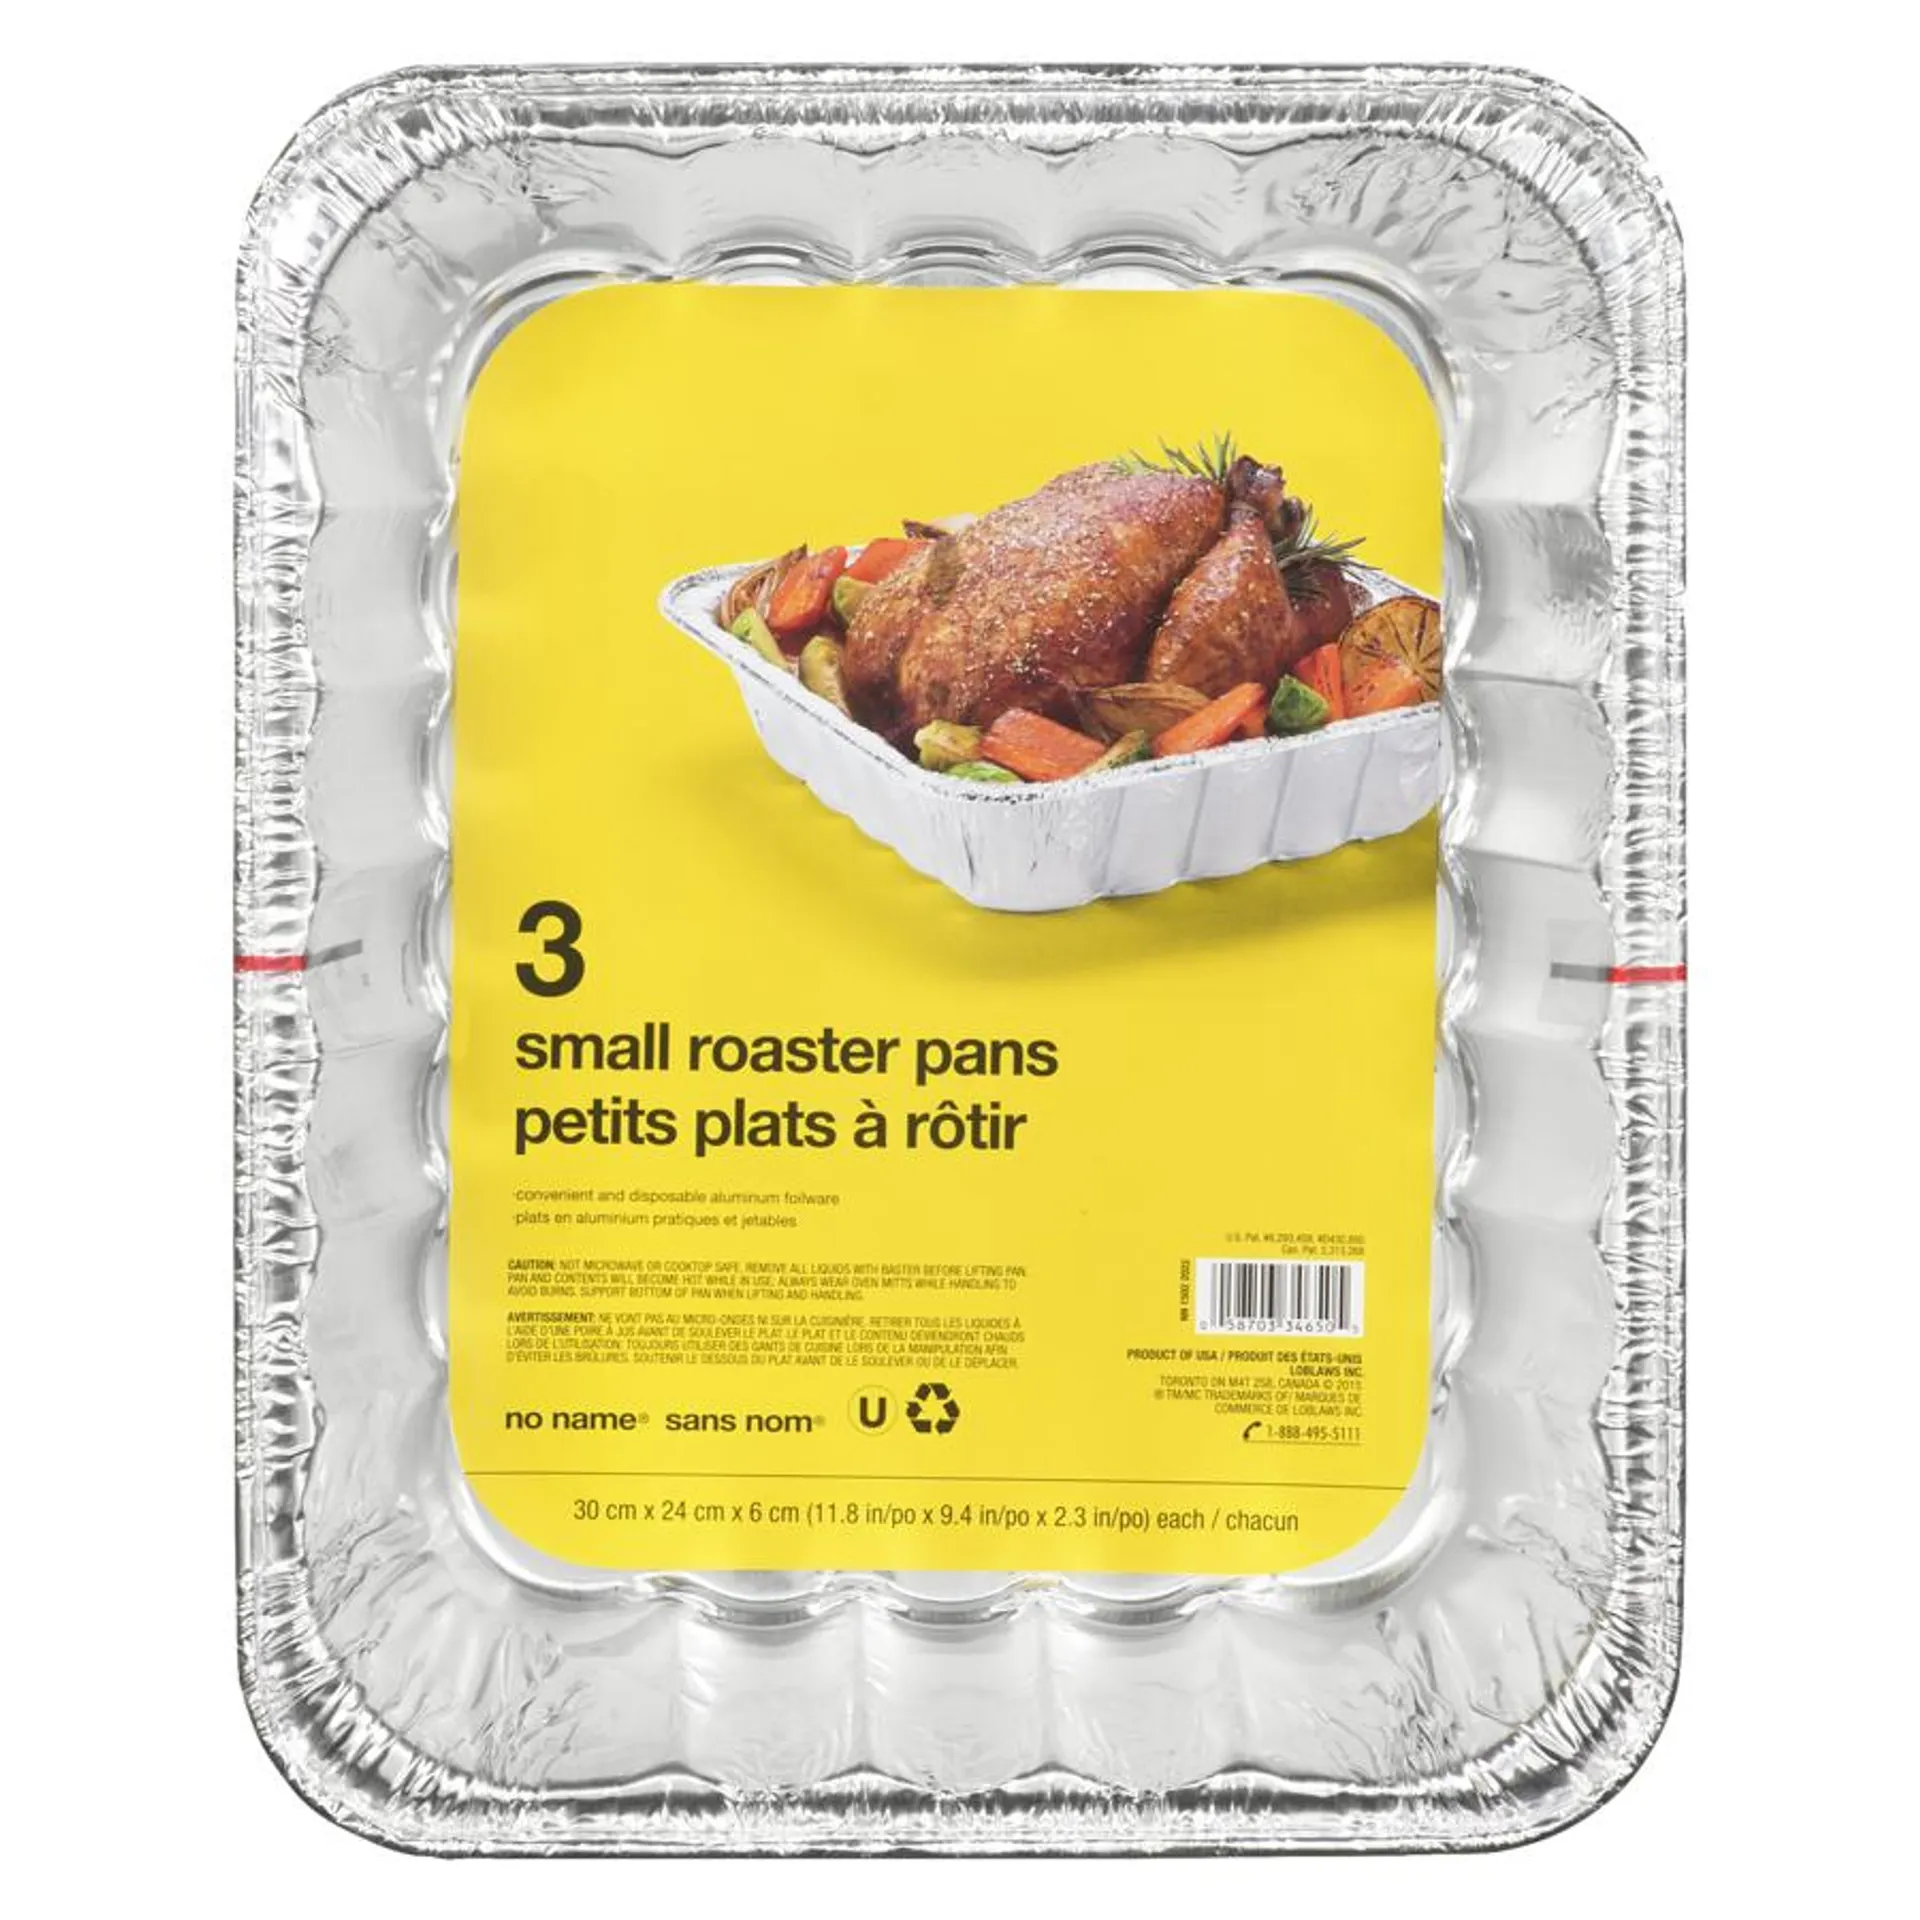 Small Roaster Pans, 3 pack